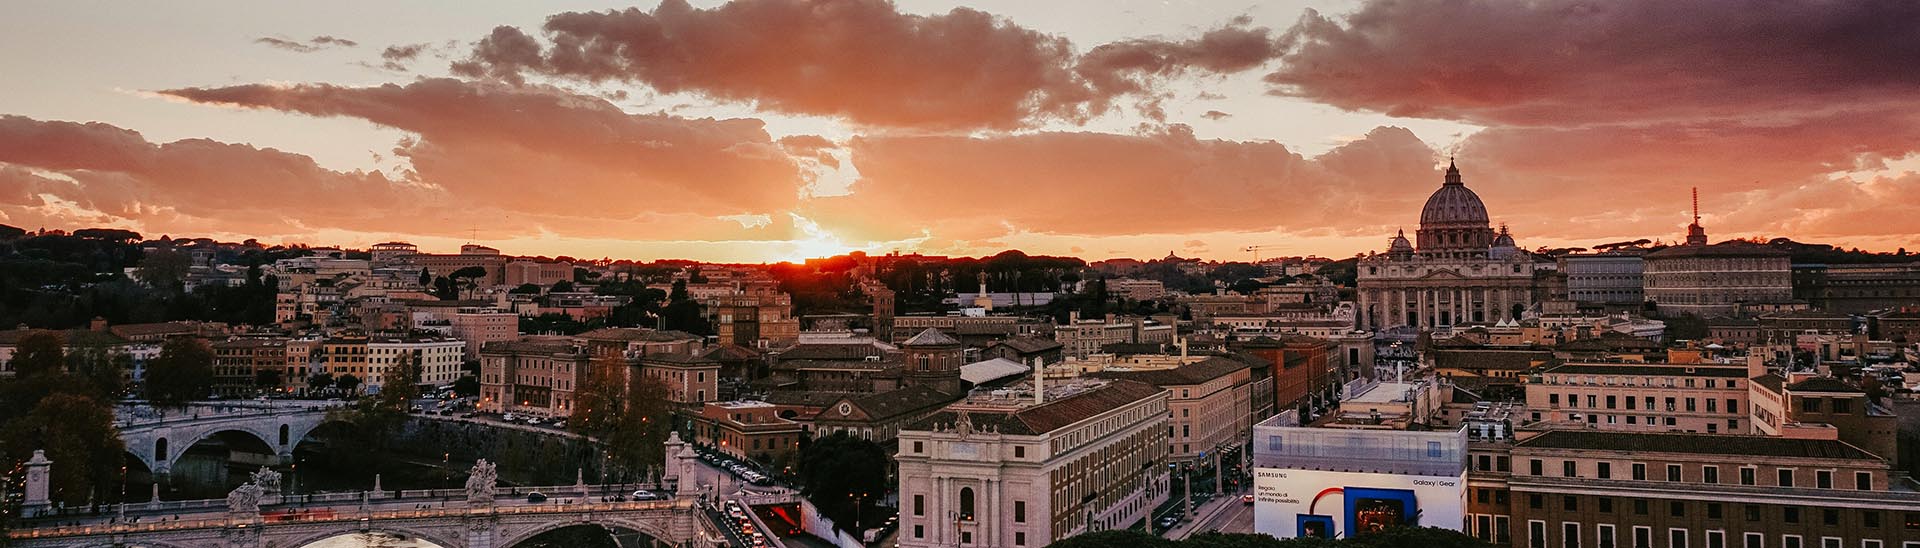 Cheap Flights To Rome (FCO)